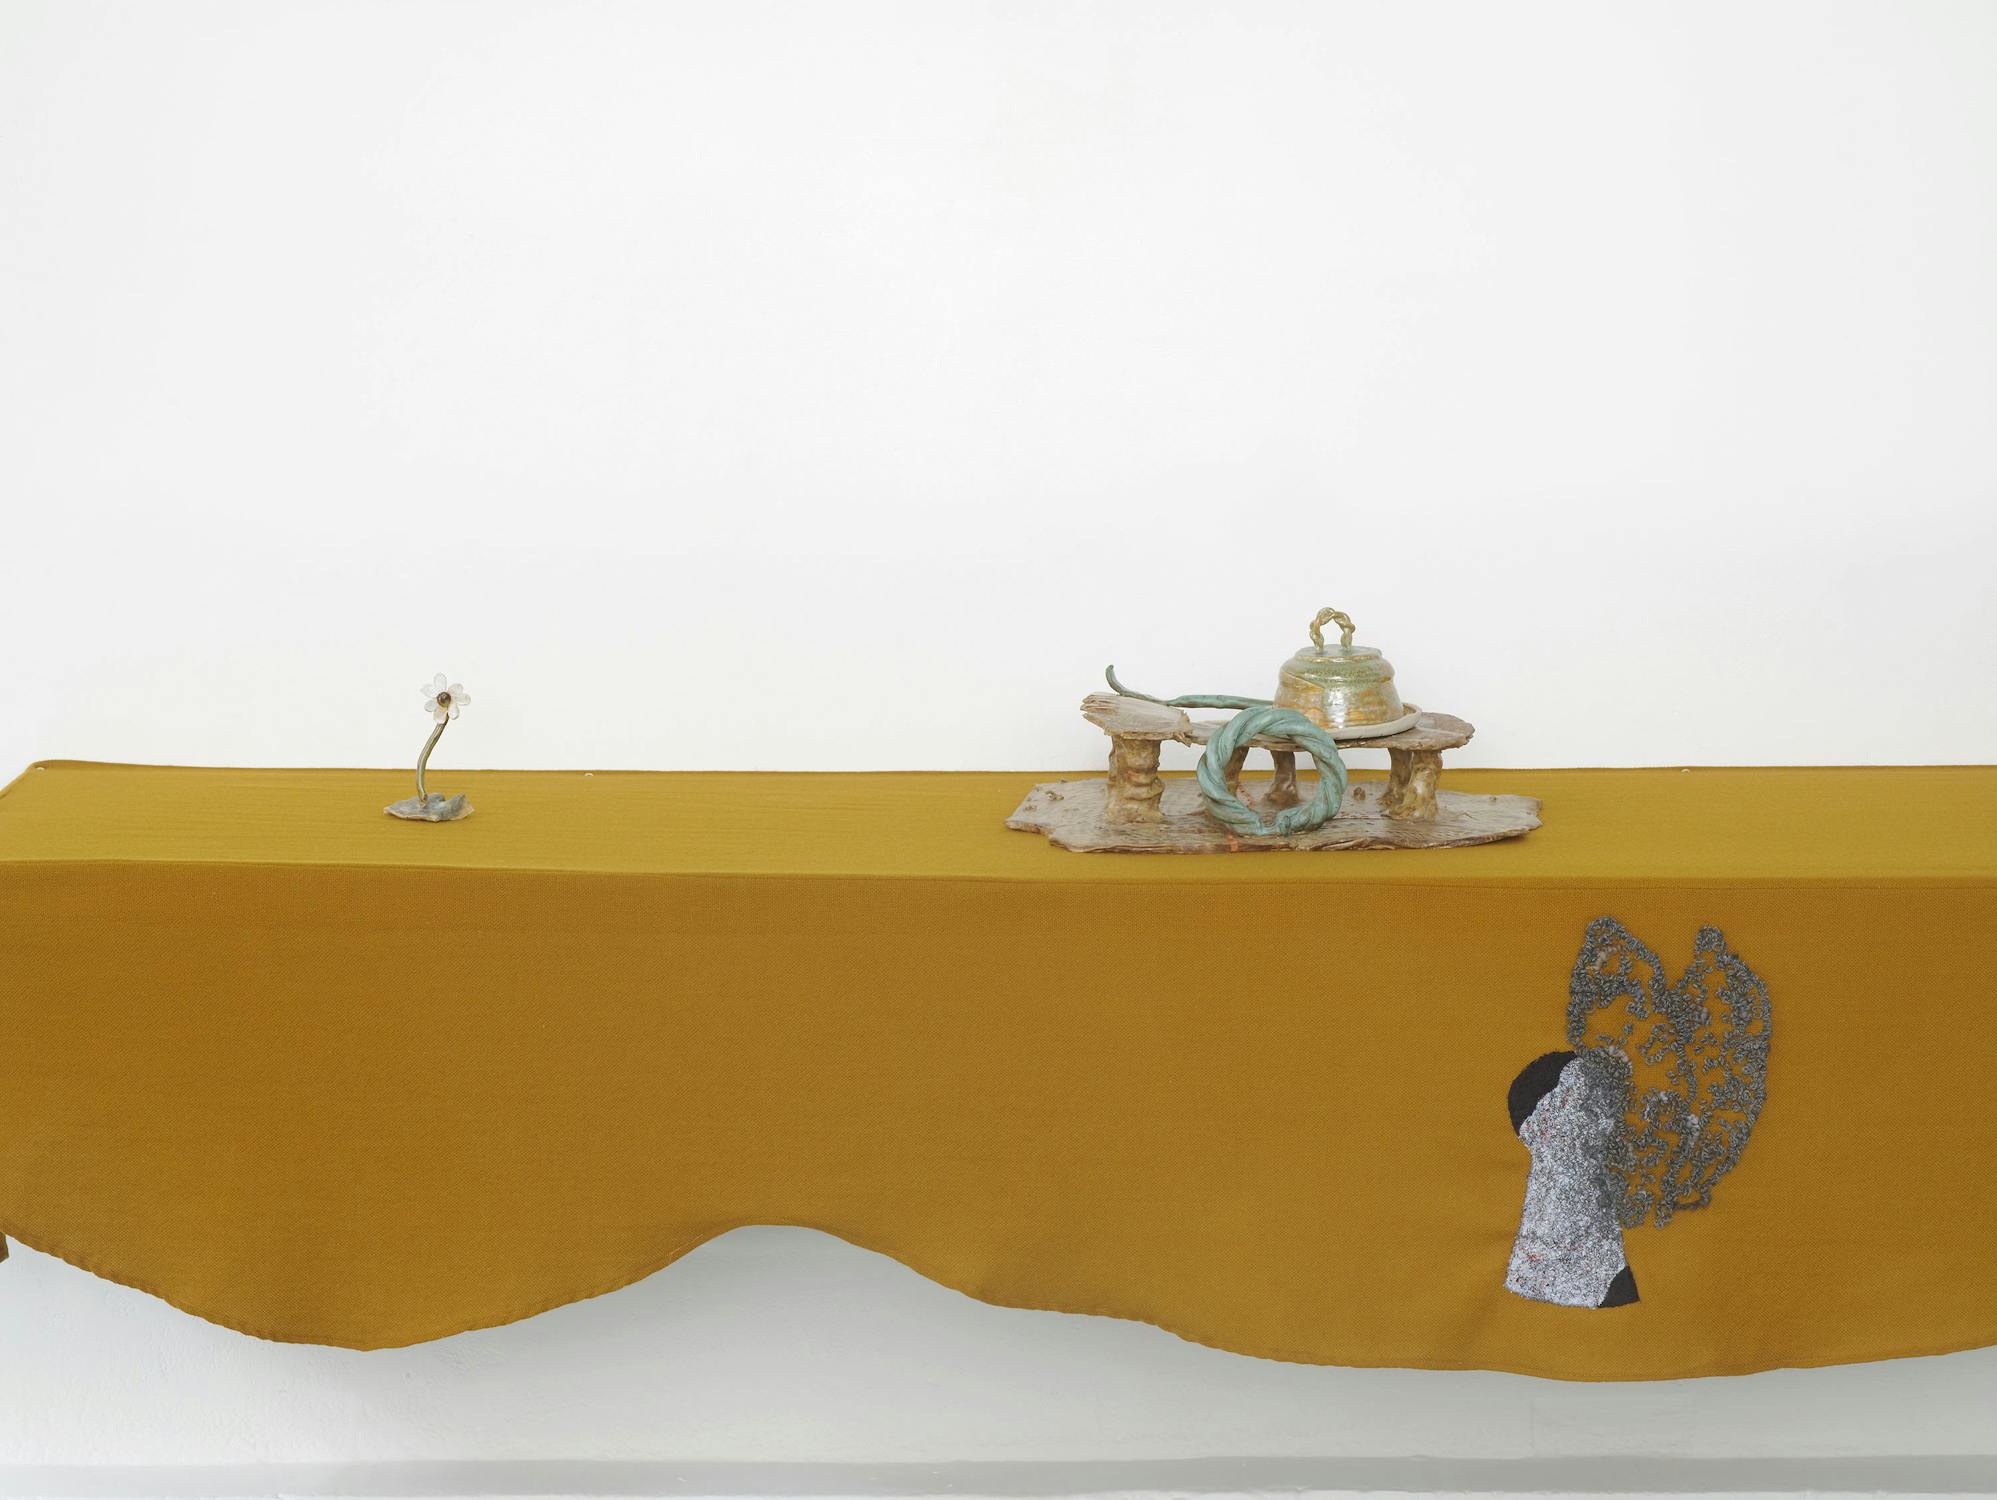 a wall-mounted shelf draped with mustard-coloured fabric. The shelf display a small ceramic flower and a larger glazed sculptural work.